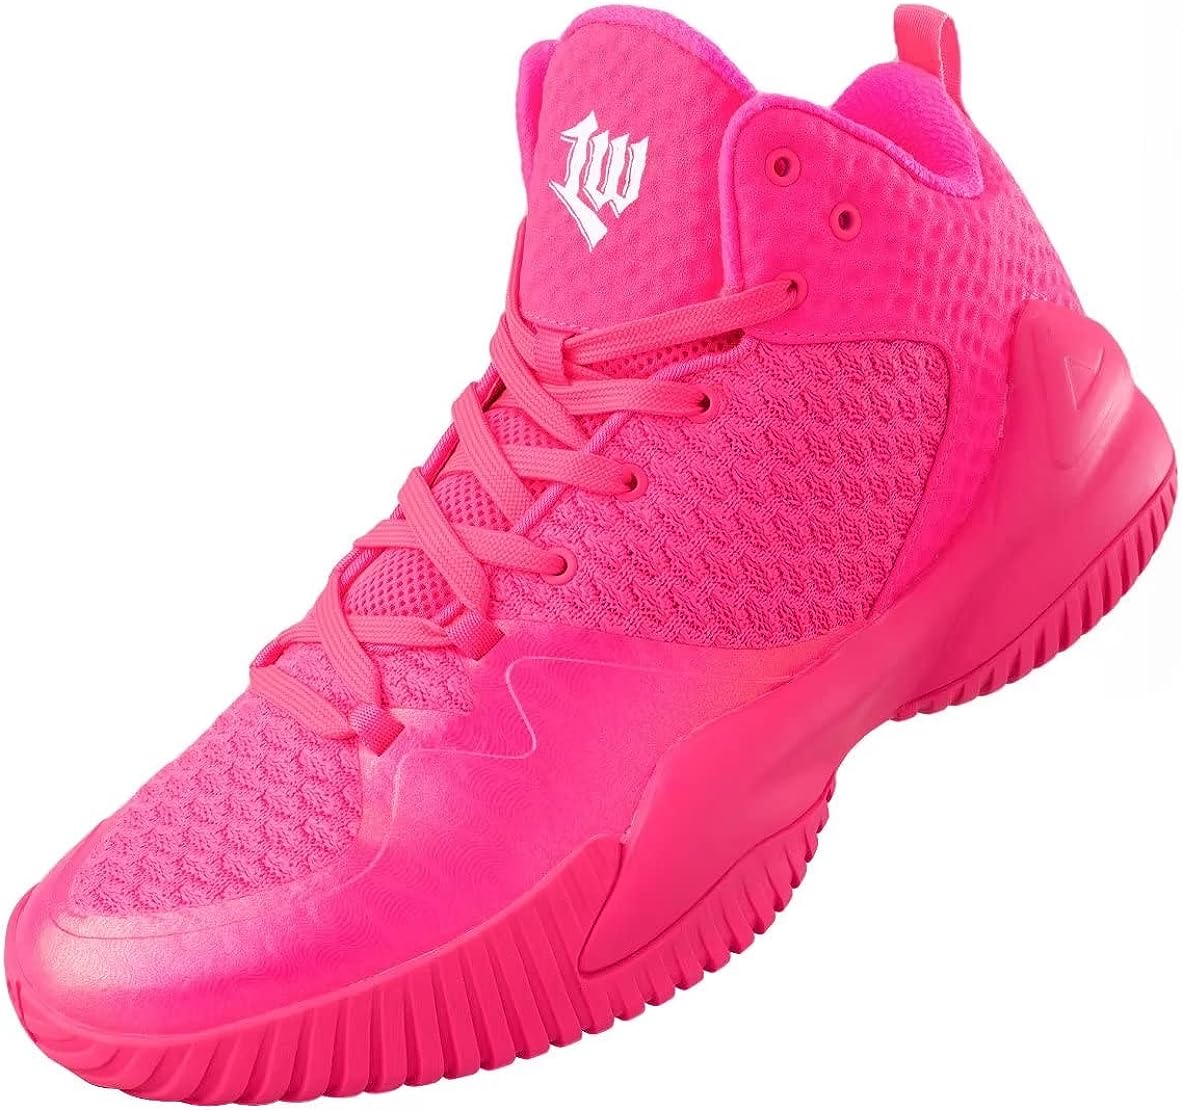 best pink basketball shoes